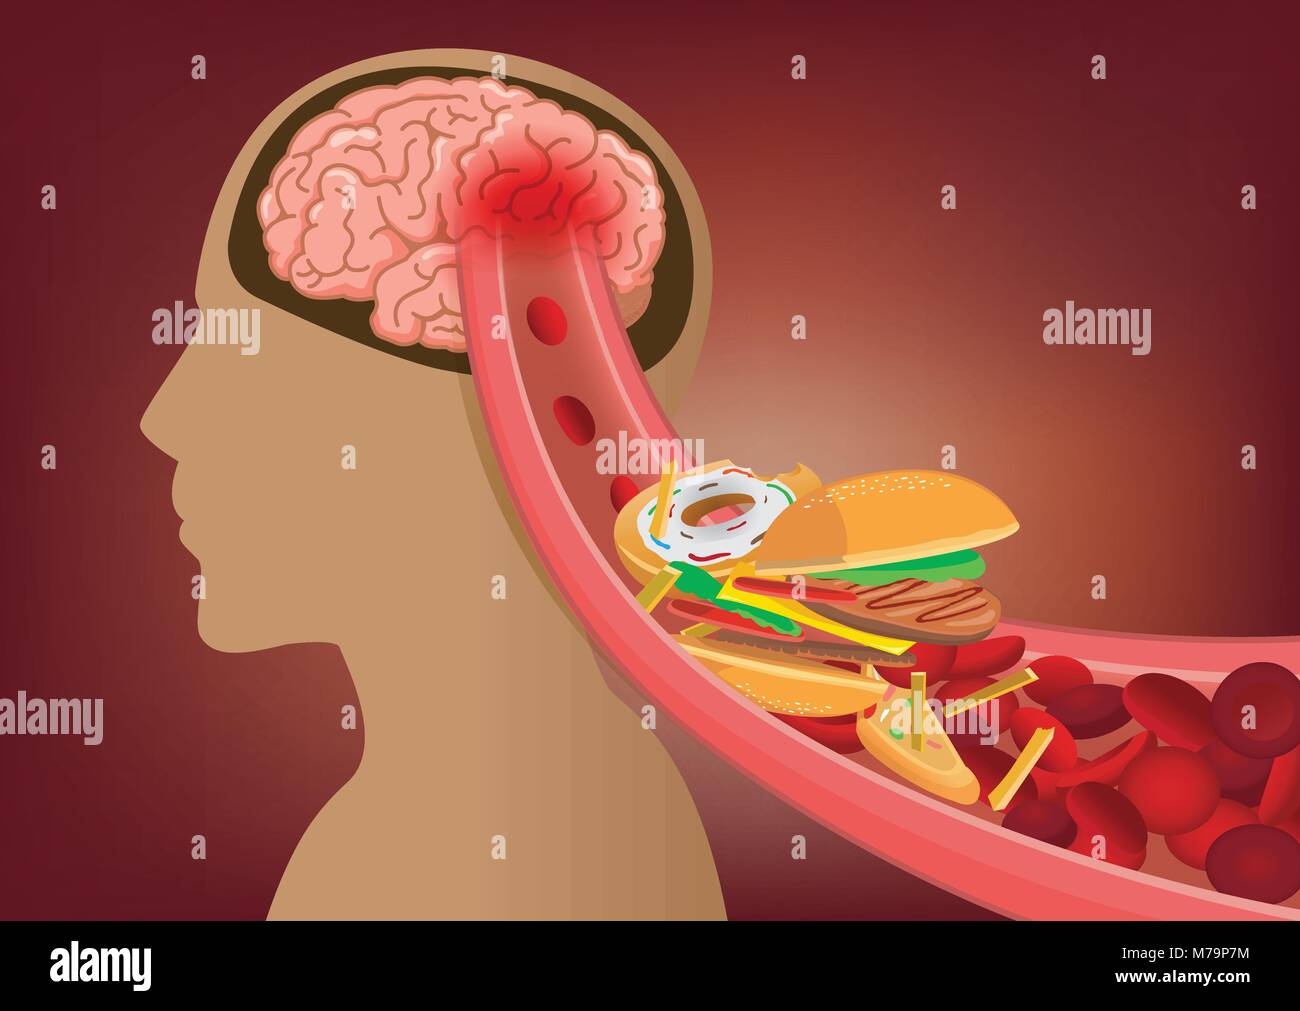 Blood can't flow into human brain because fast food made clogged arteries. Stock Vector